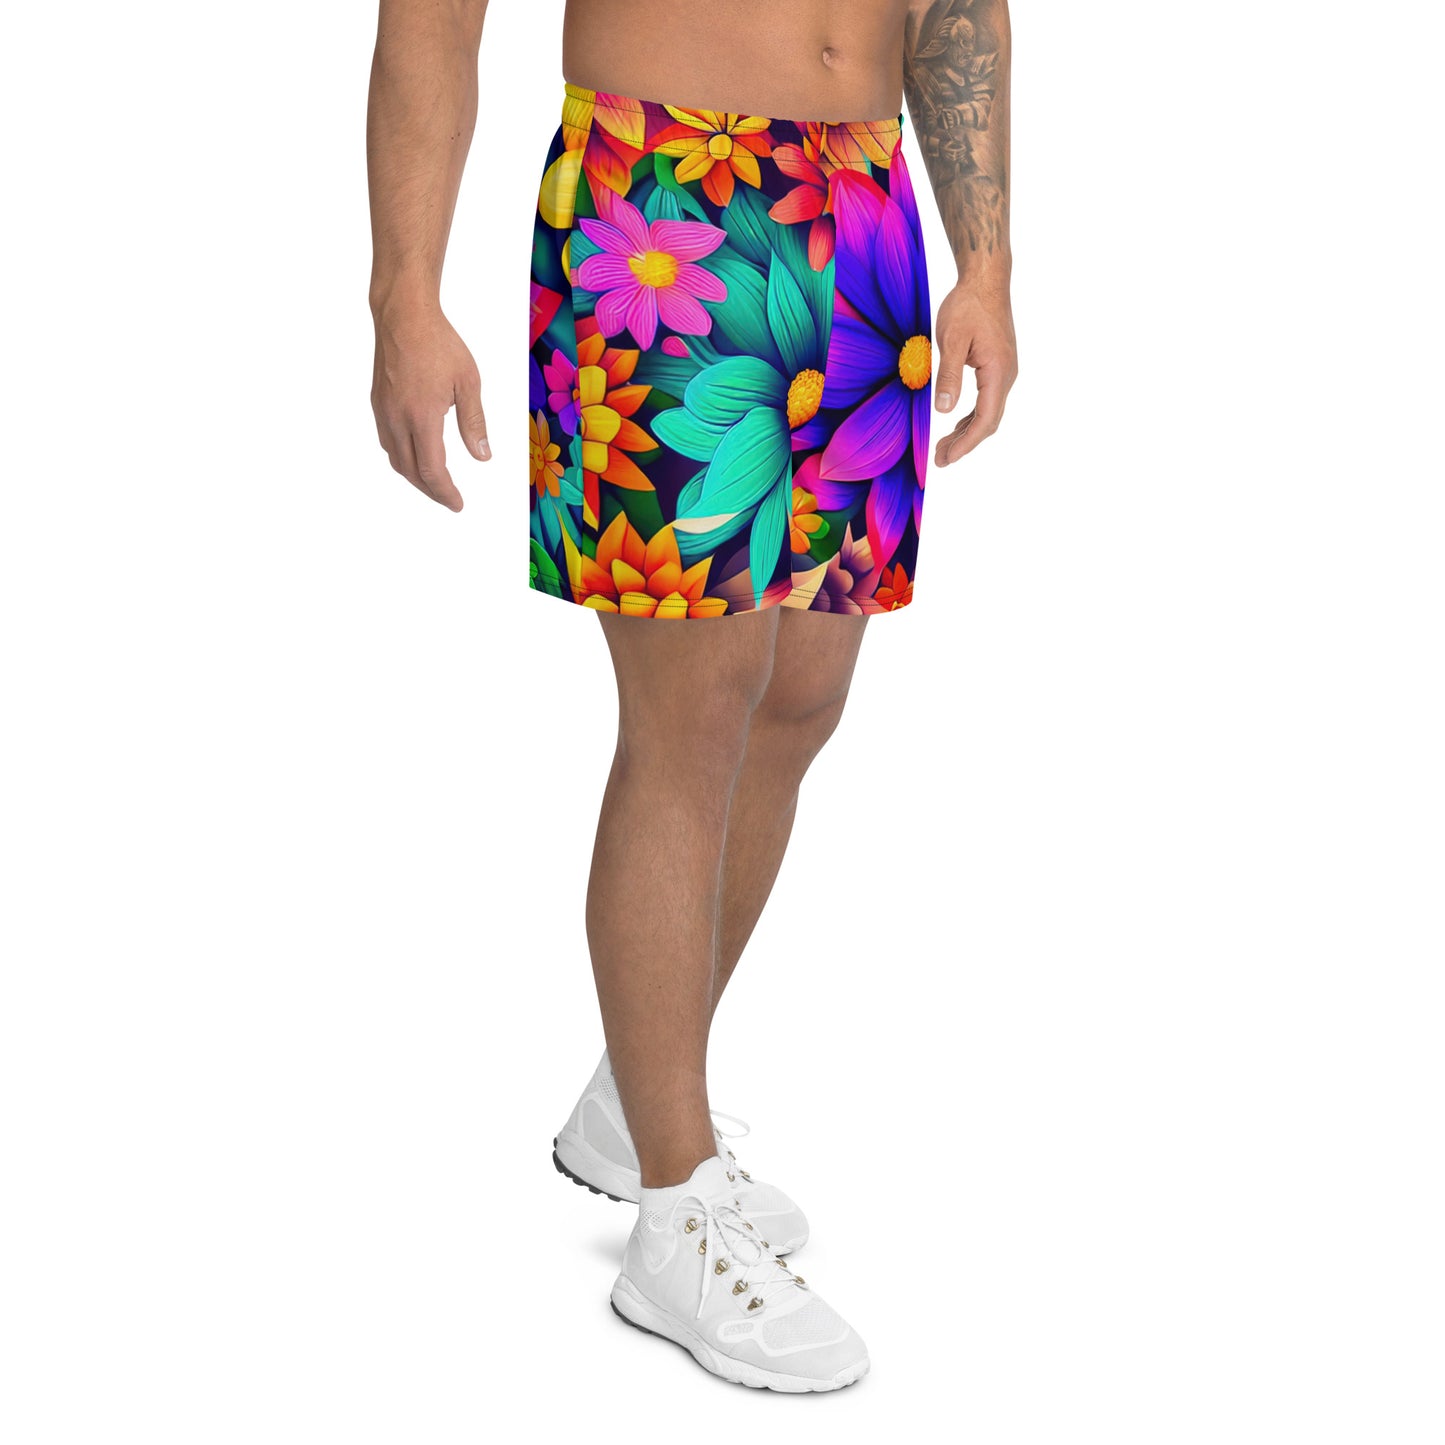 DMV 1466 Floral Men's Recycled Athletic Shorts